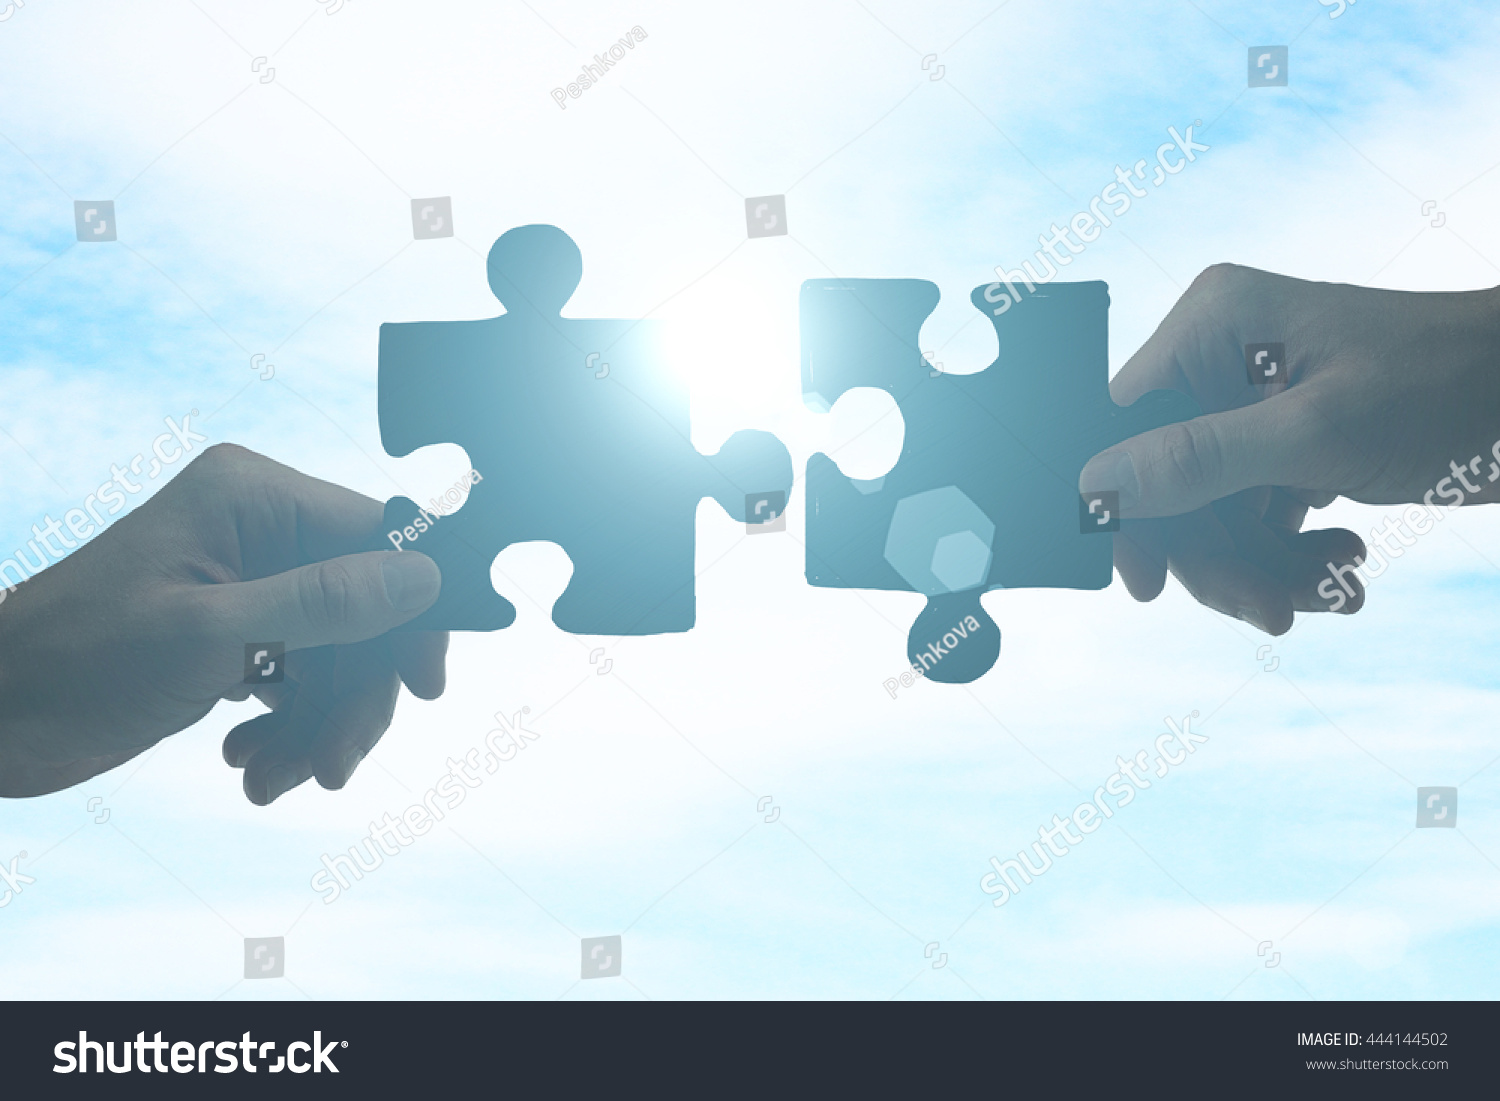 Partnership concept with hands putting puzzle pieces together on sky background with sunlight #444144502